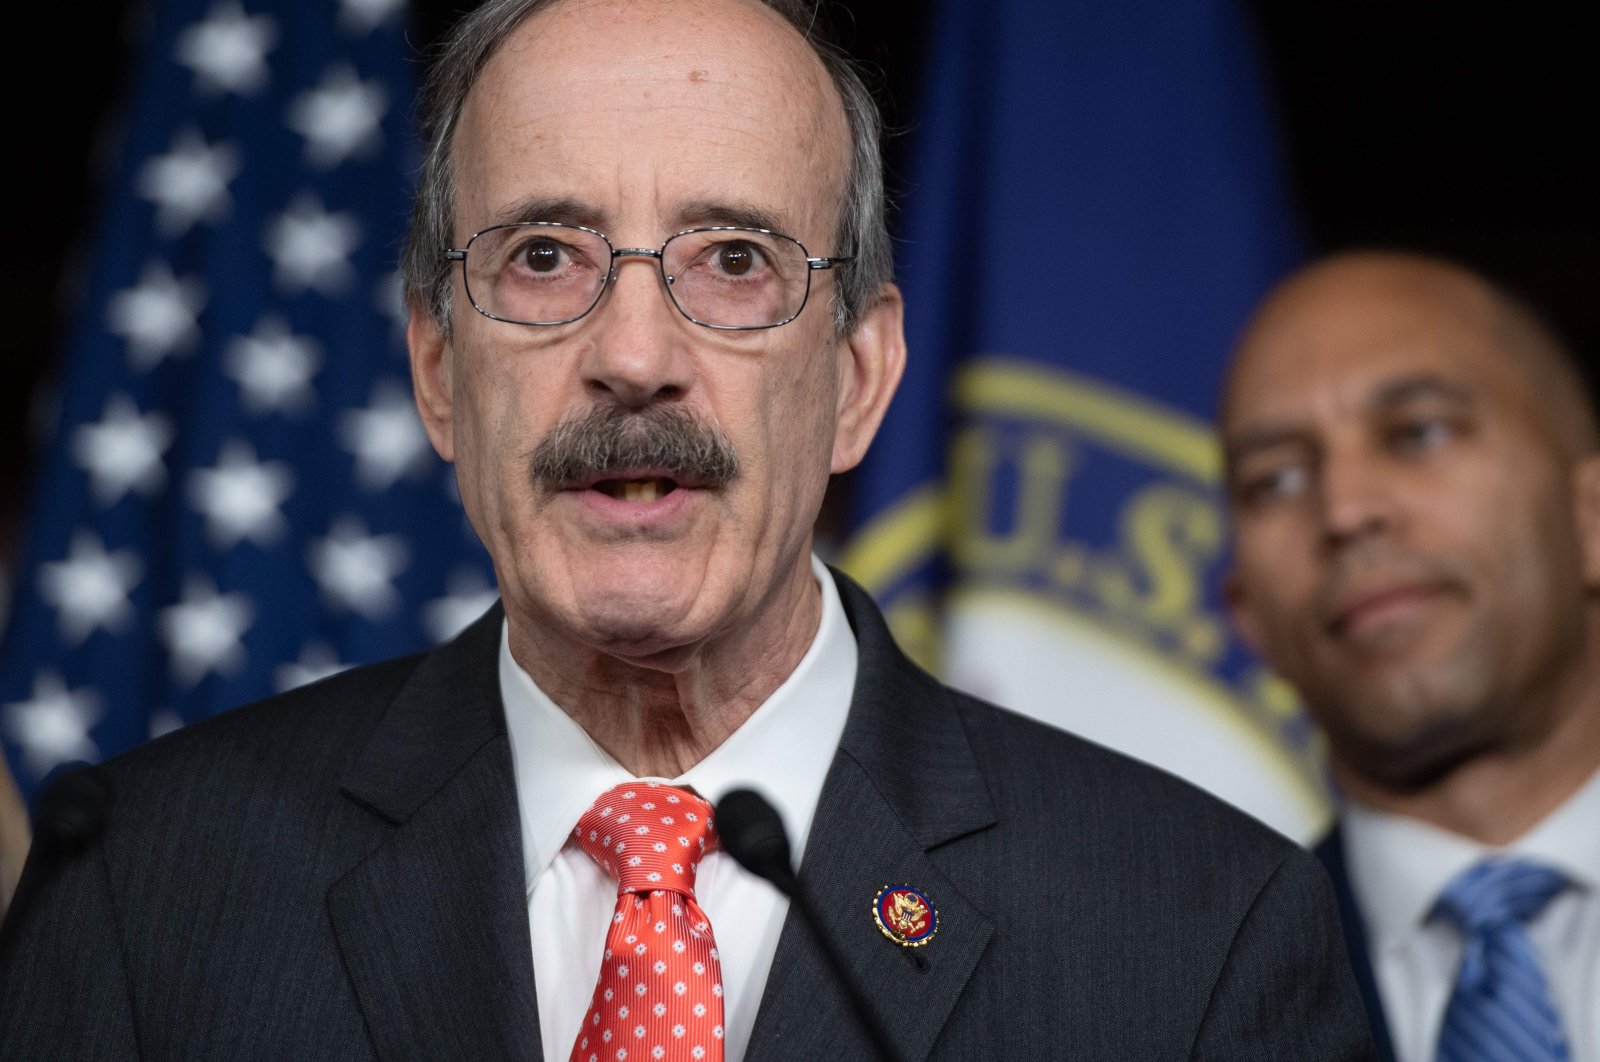 In this file photo from May 18, 2020, Representative Eliot Engel, Democrat for California, speaks during a press conference on Capitol Hill in Washington. Engel claims the State Department watchdog abruptly fired by President Donald Trump was probing his controversial bypassing of Congress to sell weapons to Saudi Arabia, Washington D.C.